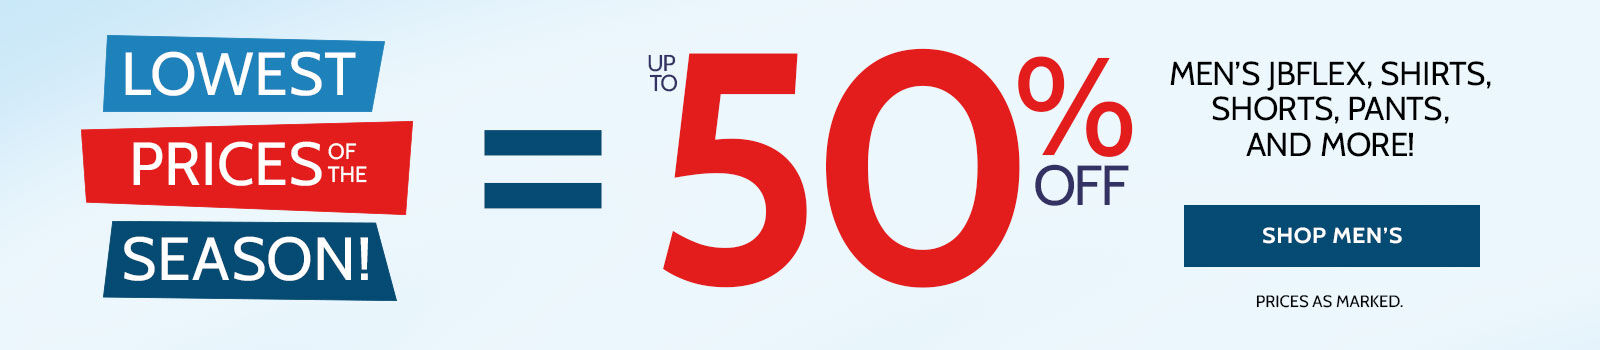 LOWEST PRICES OFD THE SEASON UP TO 50% off men's jbflex, shirts, shorts, pants, and more! shop men's *prices as marked.